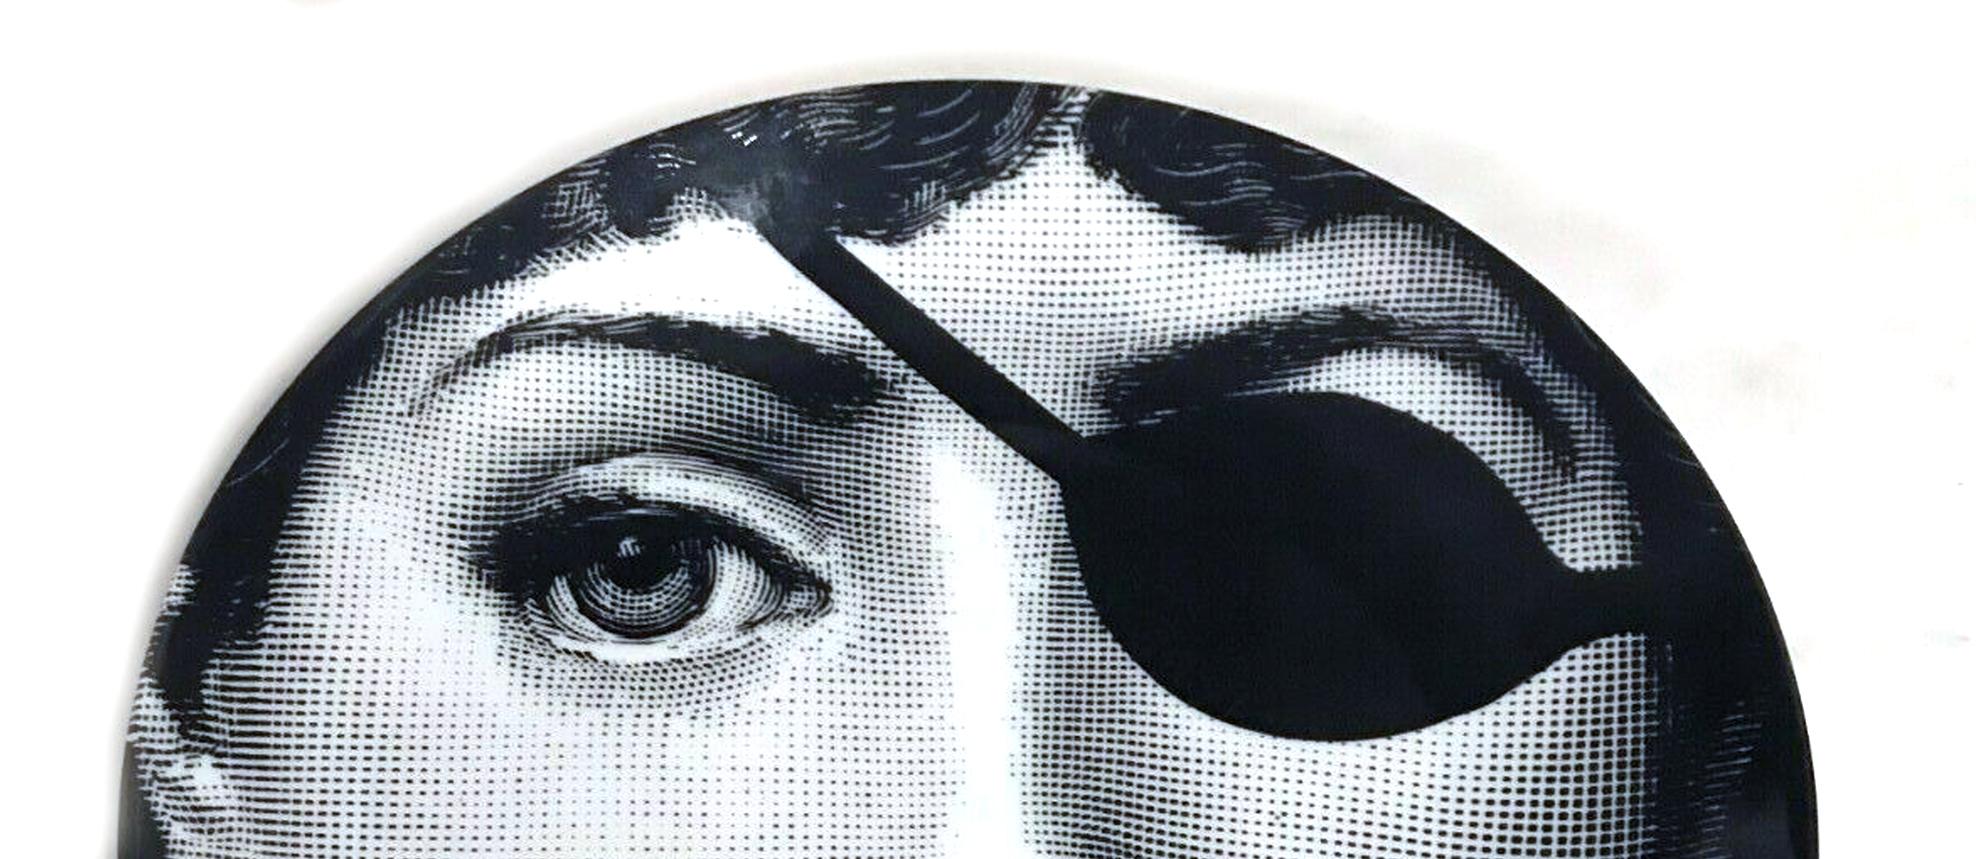 Piero Fornasetti Themes & Variations porcelain plate, #8,
Lina Cavalieri with Eye Patch,
1970s-80s.

Piero Fornasetti Tema E Variazoini Plate as it is known in Italian depicts the iconic image of Lina Cavalieri with an eye patch- a variation of